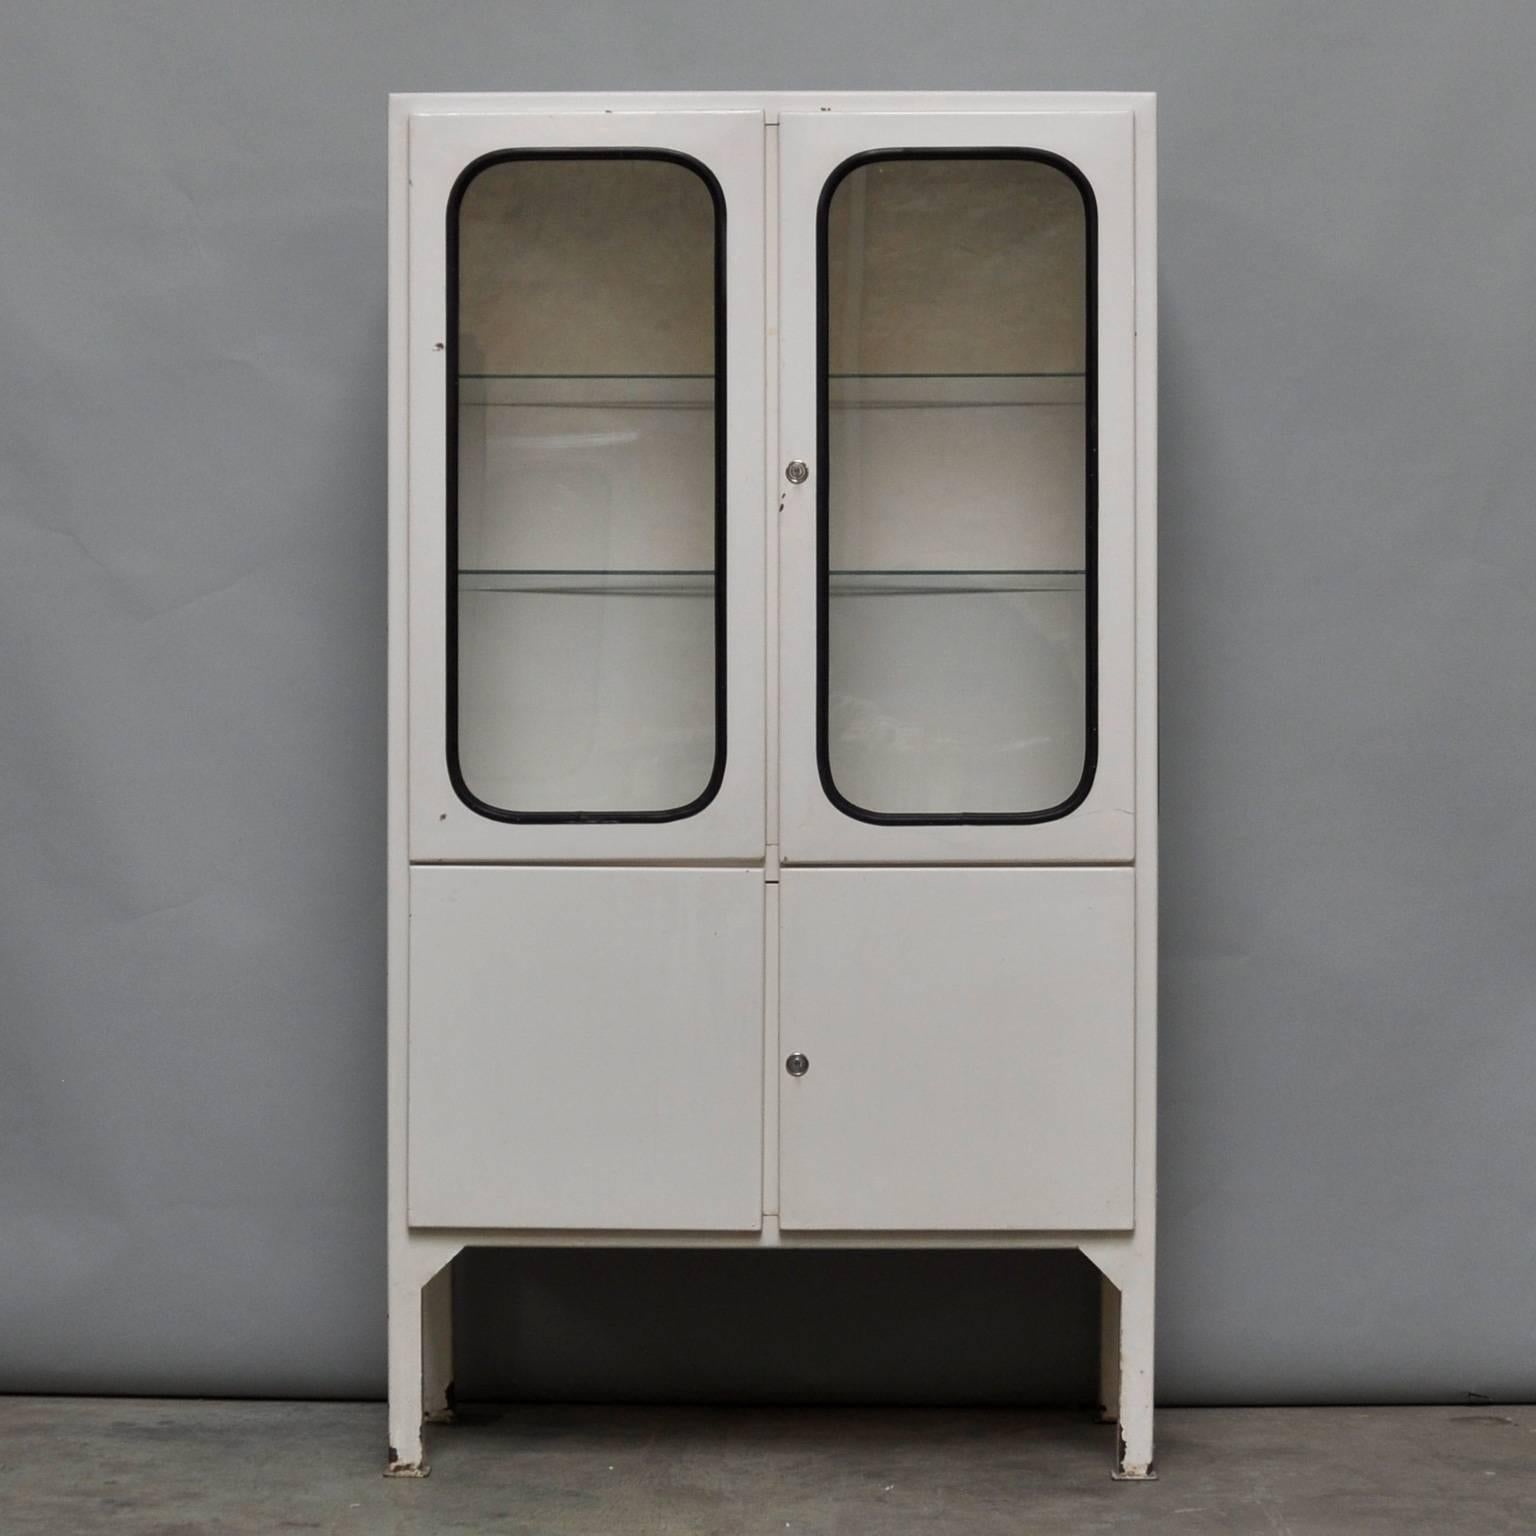 This medicine cabinet was designed in the 1970s and was produced circa 1975 in Hungary. The piece is made from iron and antique glass and the glass is held by a black rubber strip. The cabinet features two adjustable glass shelves and functioning